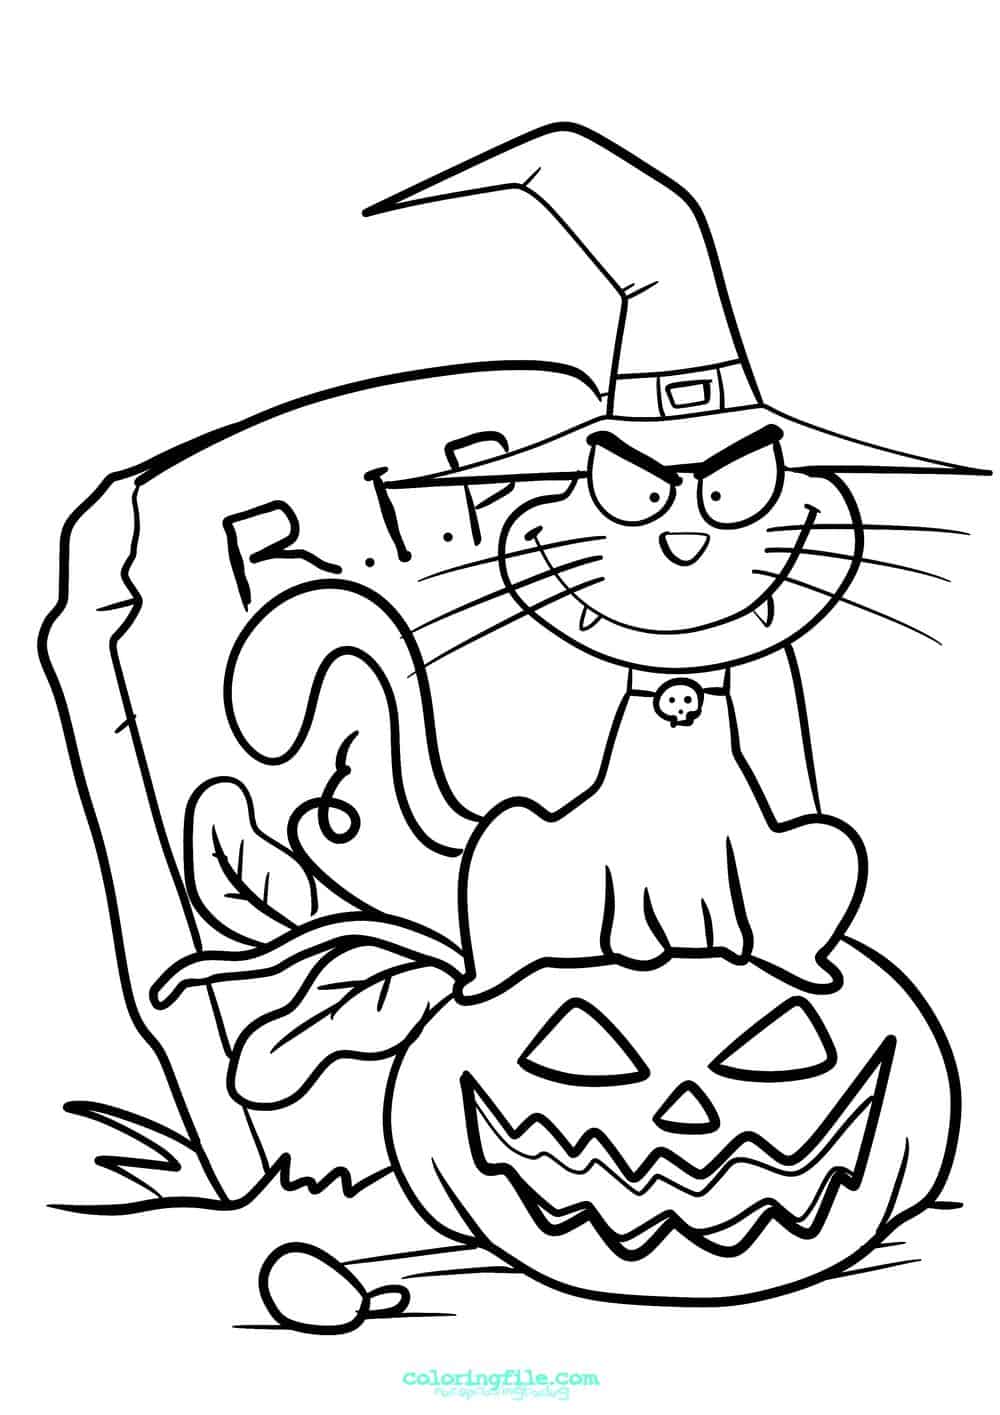 Halloween pumpkin and cat coloring pages